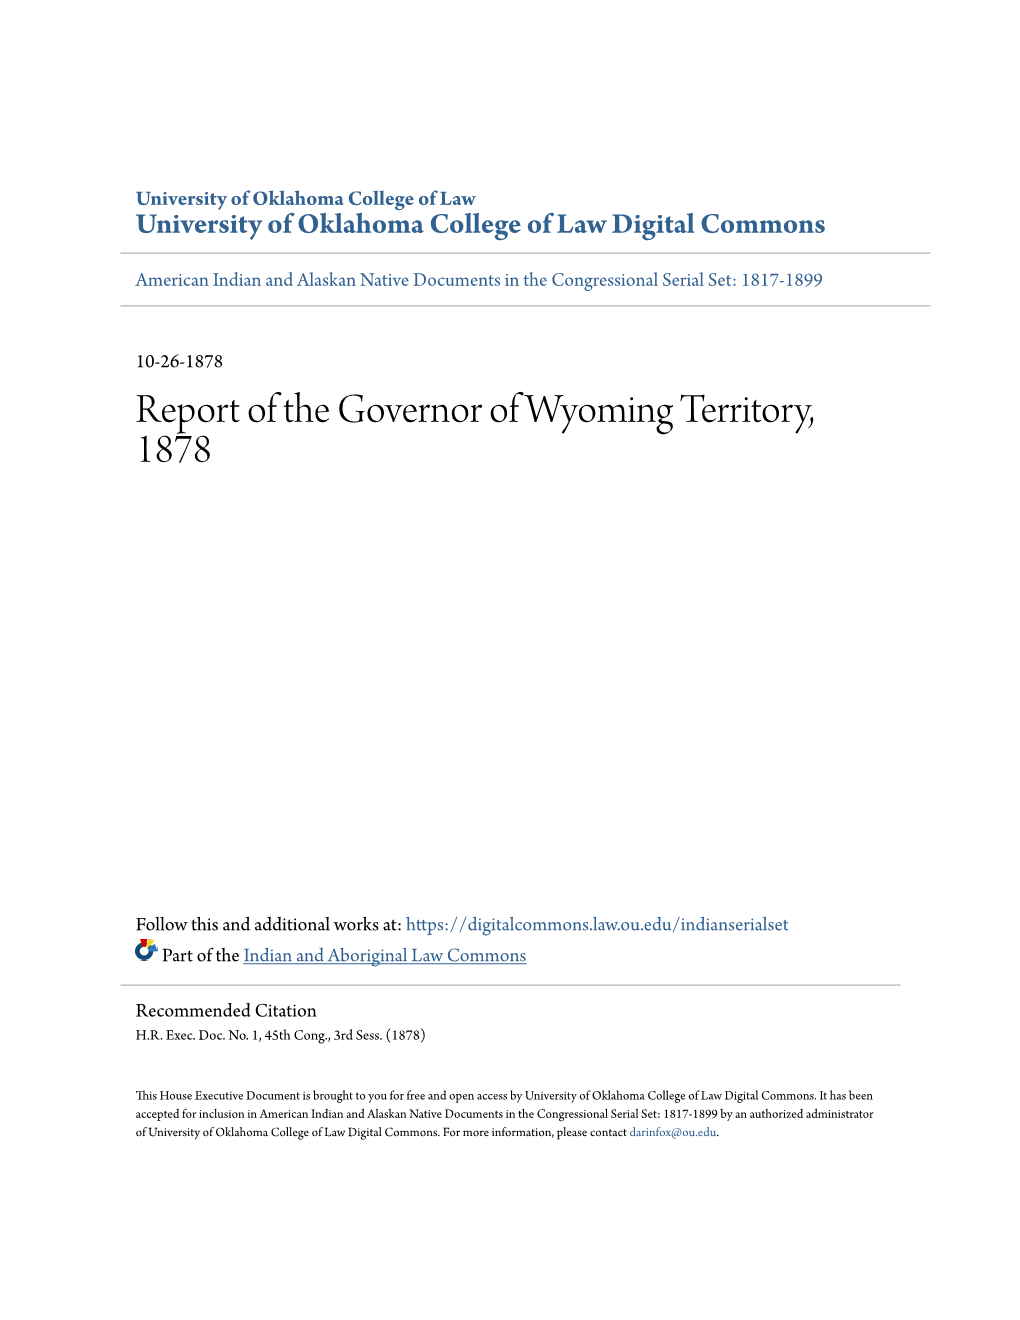 Report of the Governor of Wyoming Territory, 1878